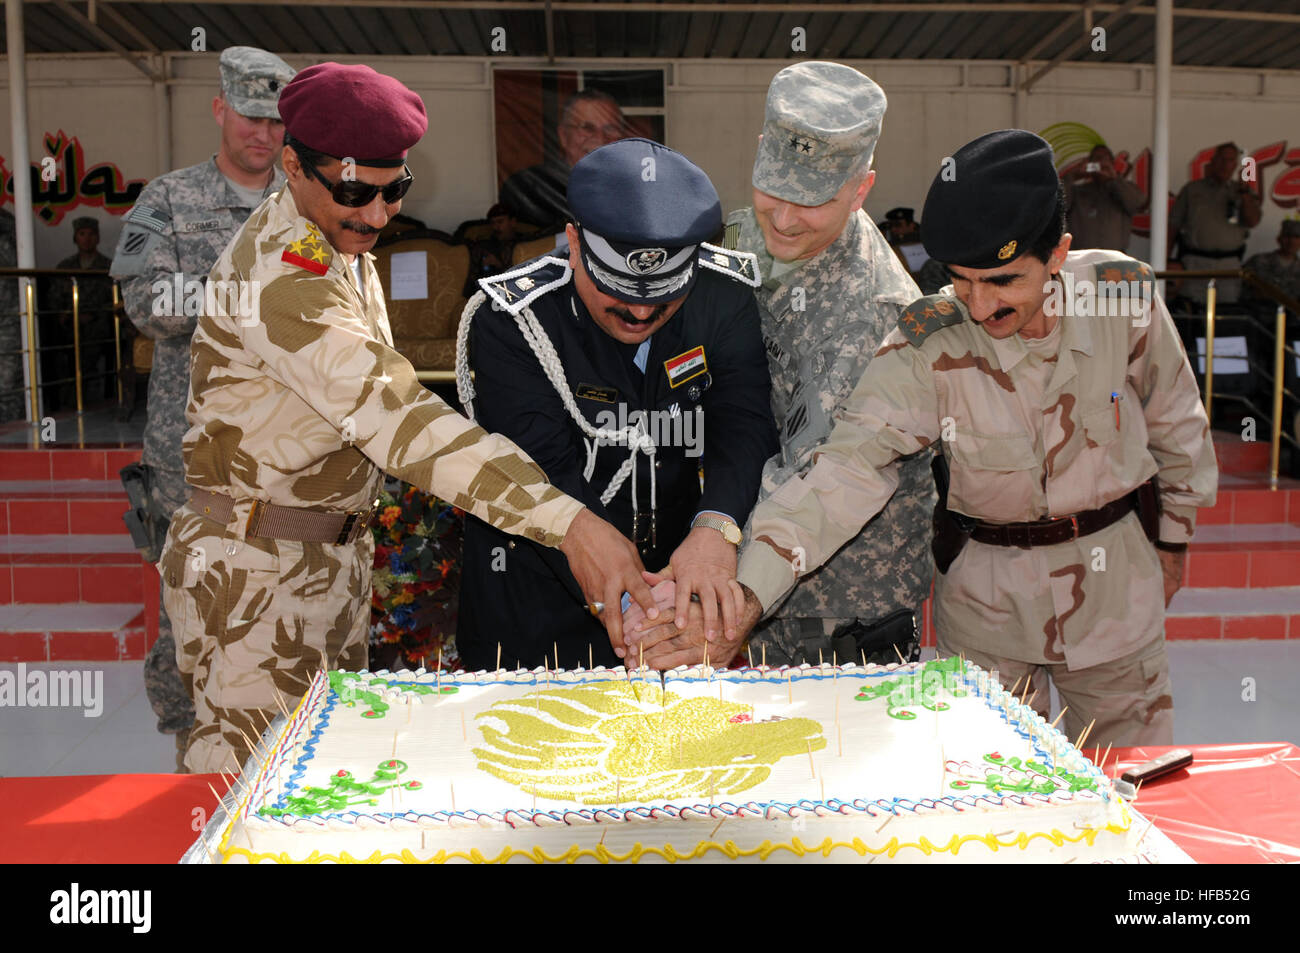 Brig. Gen Abdul Amir Hassan, division deputy commander, Iraqi Army, Maj. Gen. Jamal Taher Bakr, provincial director of police, Maj. Gen. Anthony A. Cucolo, III, commanding general, 3rd Infantry Division, and Brig. Gen. Shirko Fatih Schiwani, representative for the Kurdistan Regional Government, cut a cake during the Combined Security Force Graduation Ceremony at the Kirkuk Training Center in Kirkuk, Iraq, Feb. 15. The CSF is a unit comprised of U.S., Kurdish and Iraqi personnel designed specifically to increase security during the election process. CSF Graduates 252770 Stock Photo